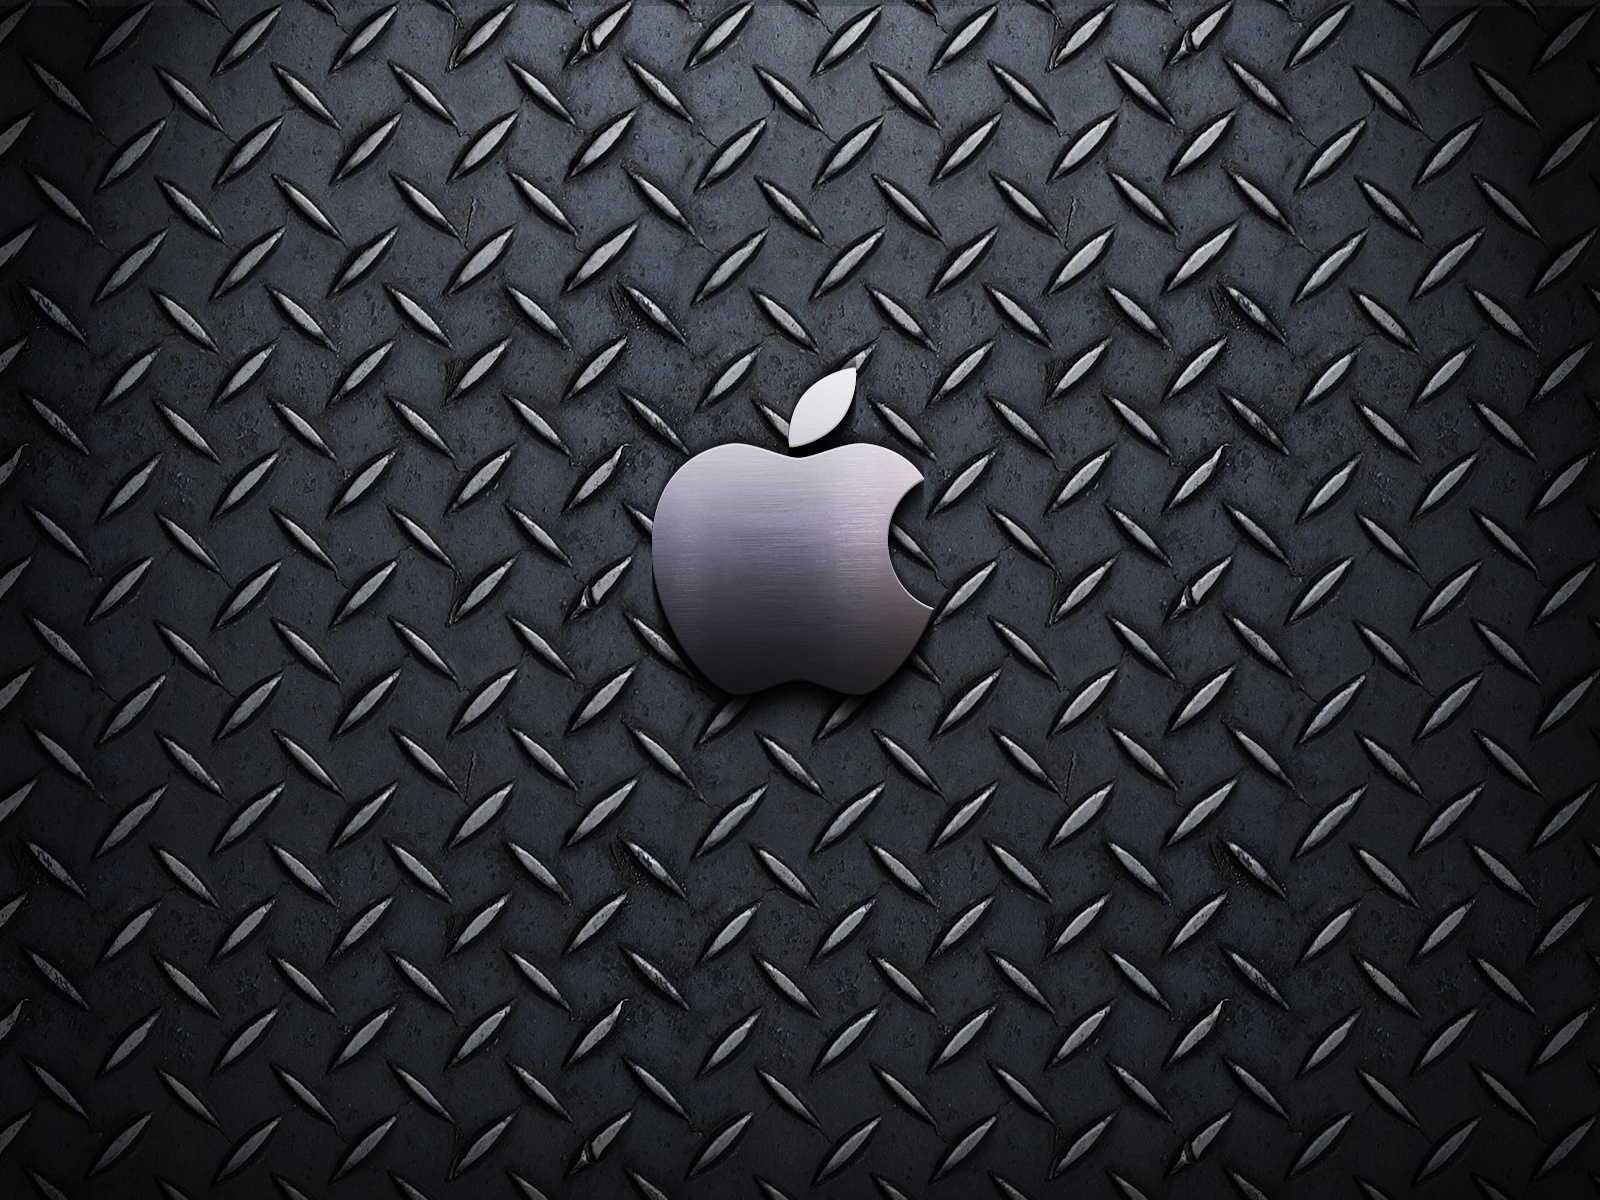 Industrial Apple for 1600 x 1200 resolution